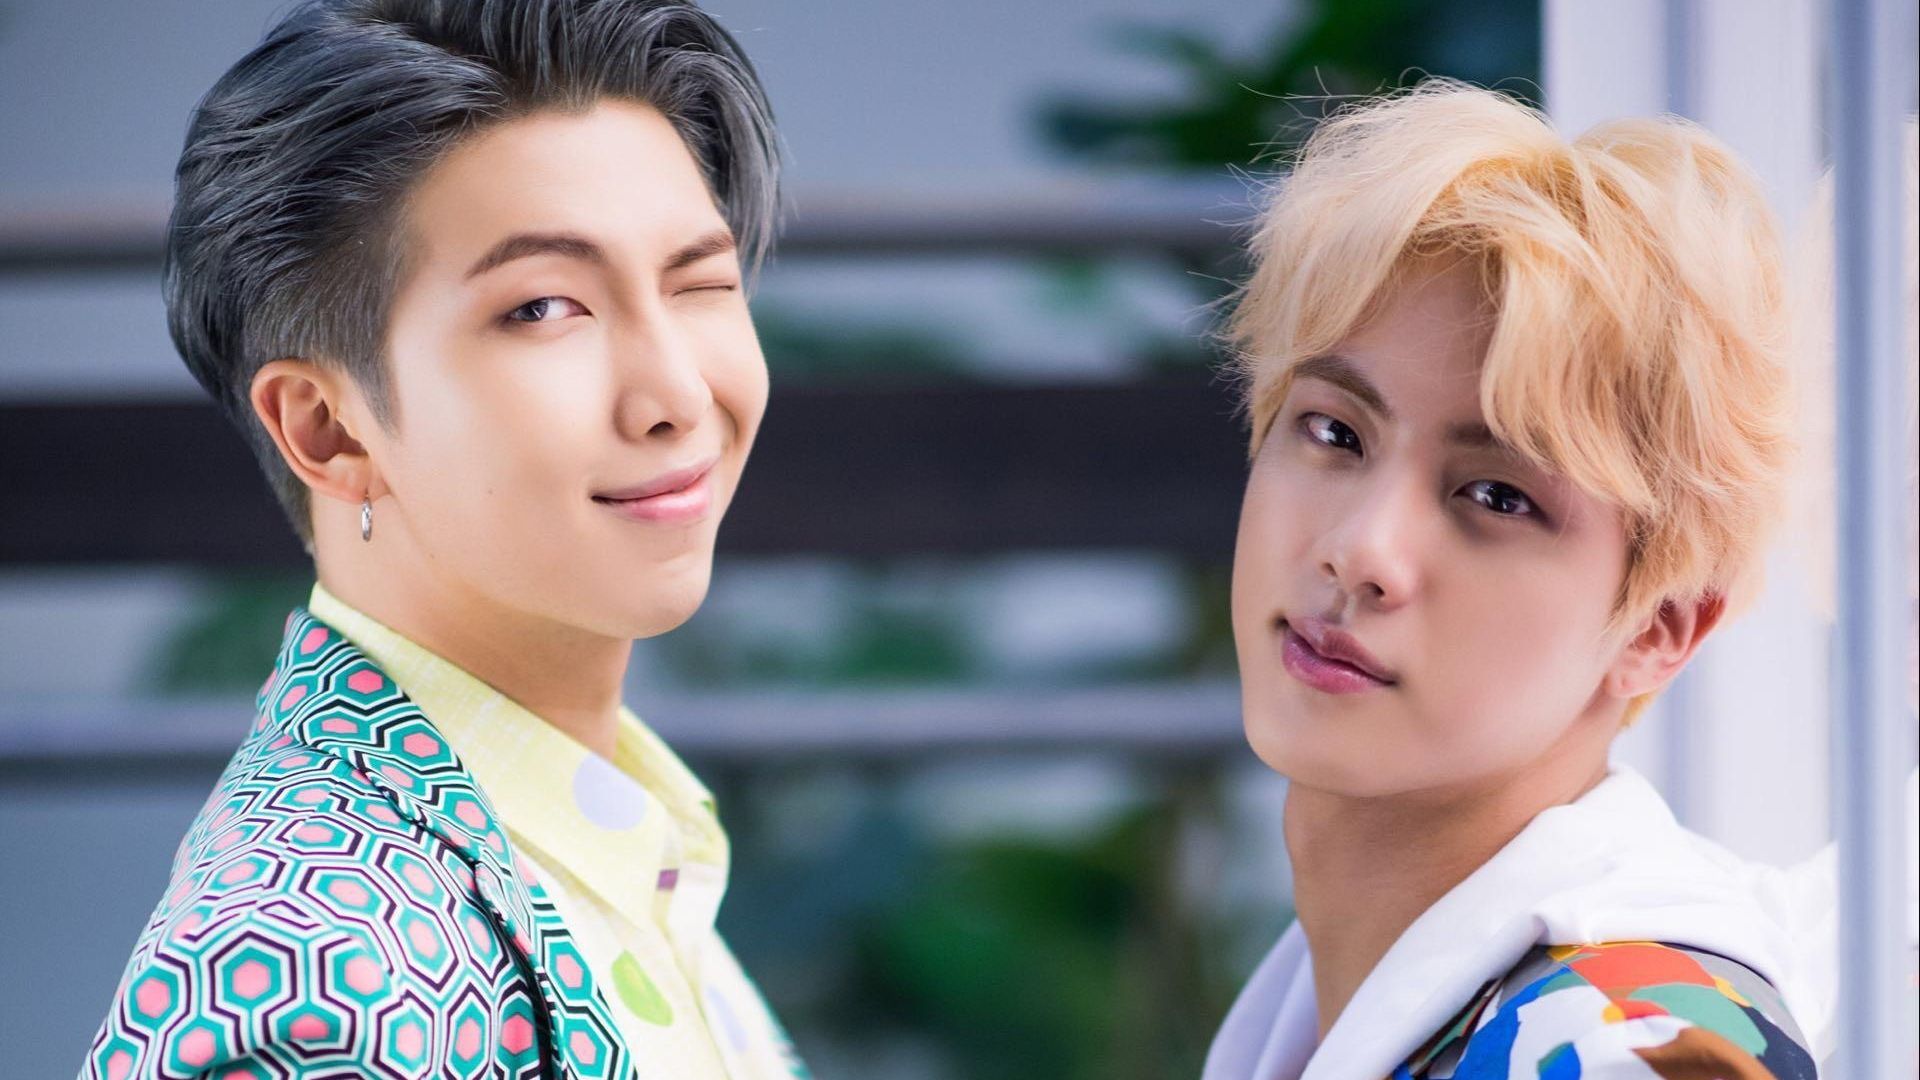 Free download BTS image Jin and RM HD wallpaper and background